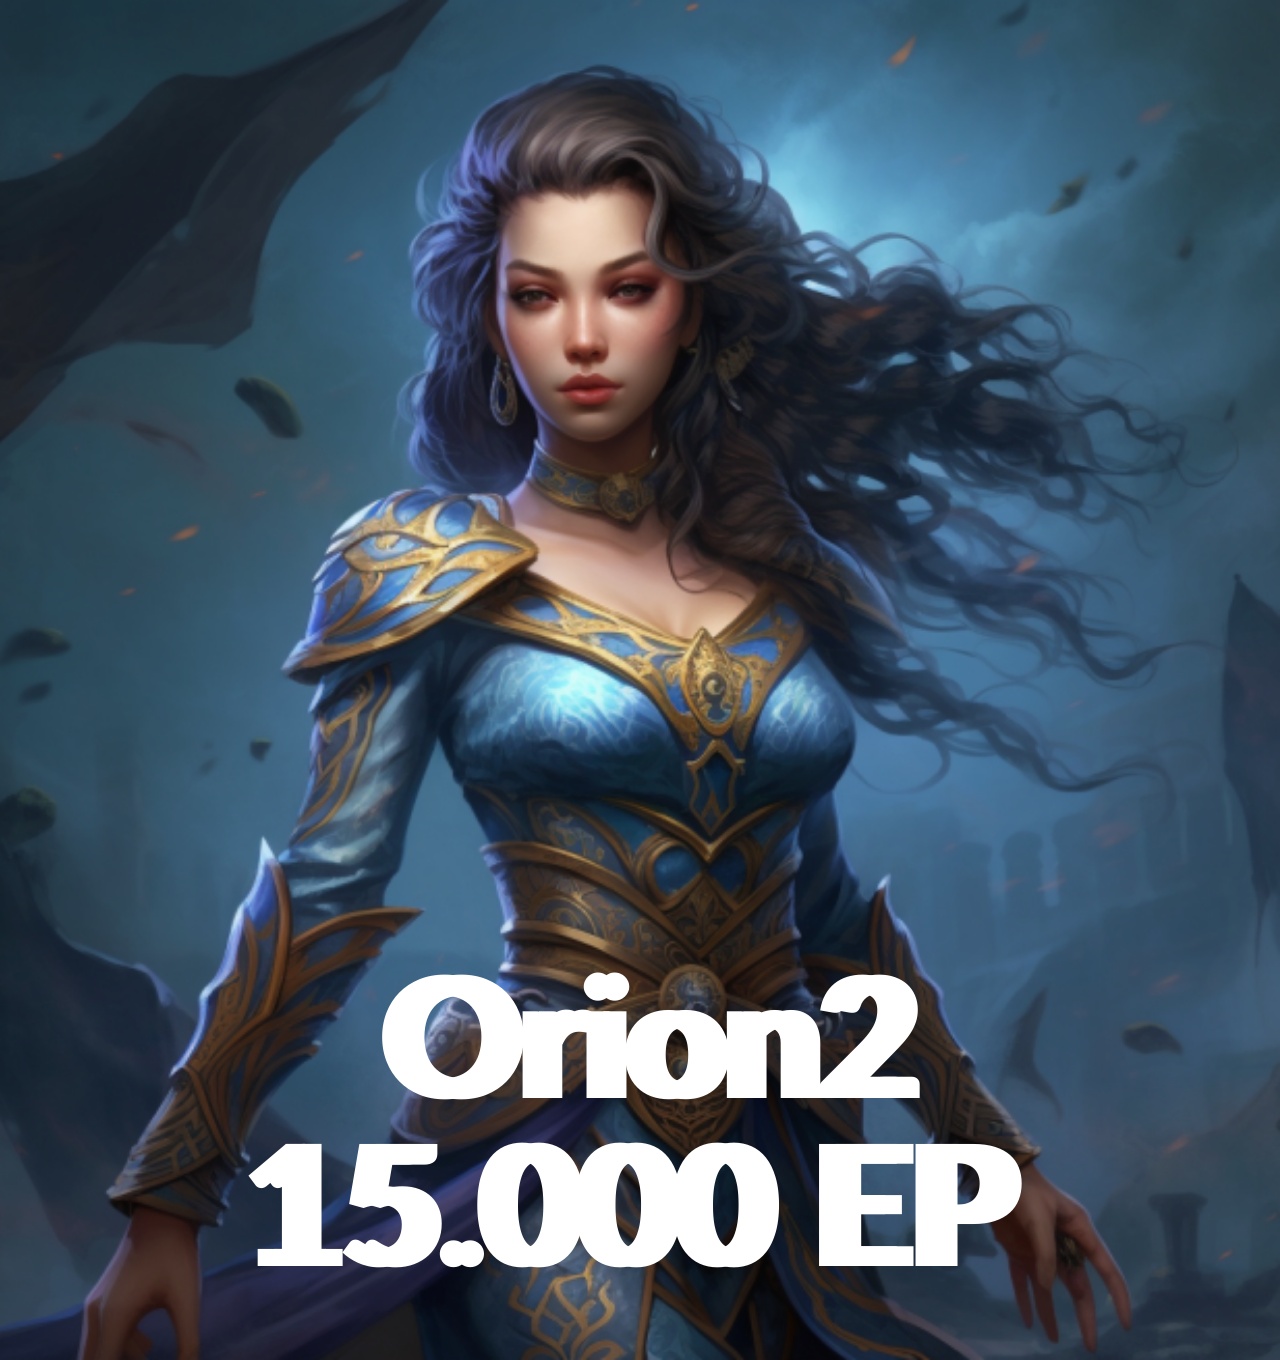 Orion2 15.000 EP